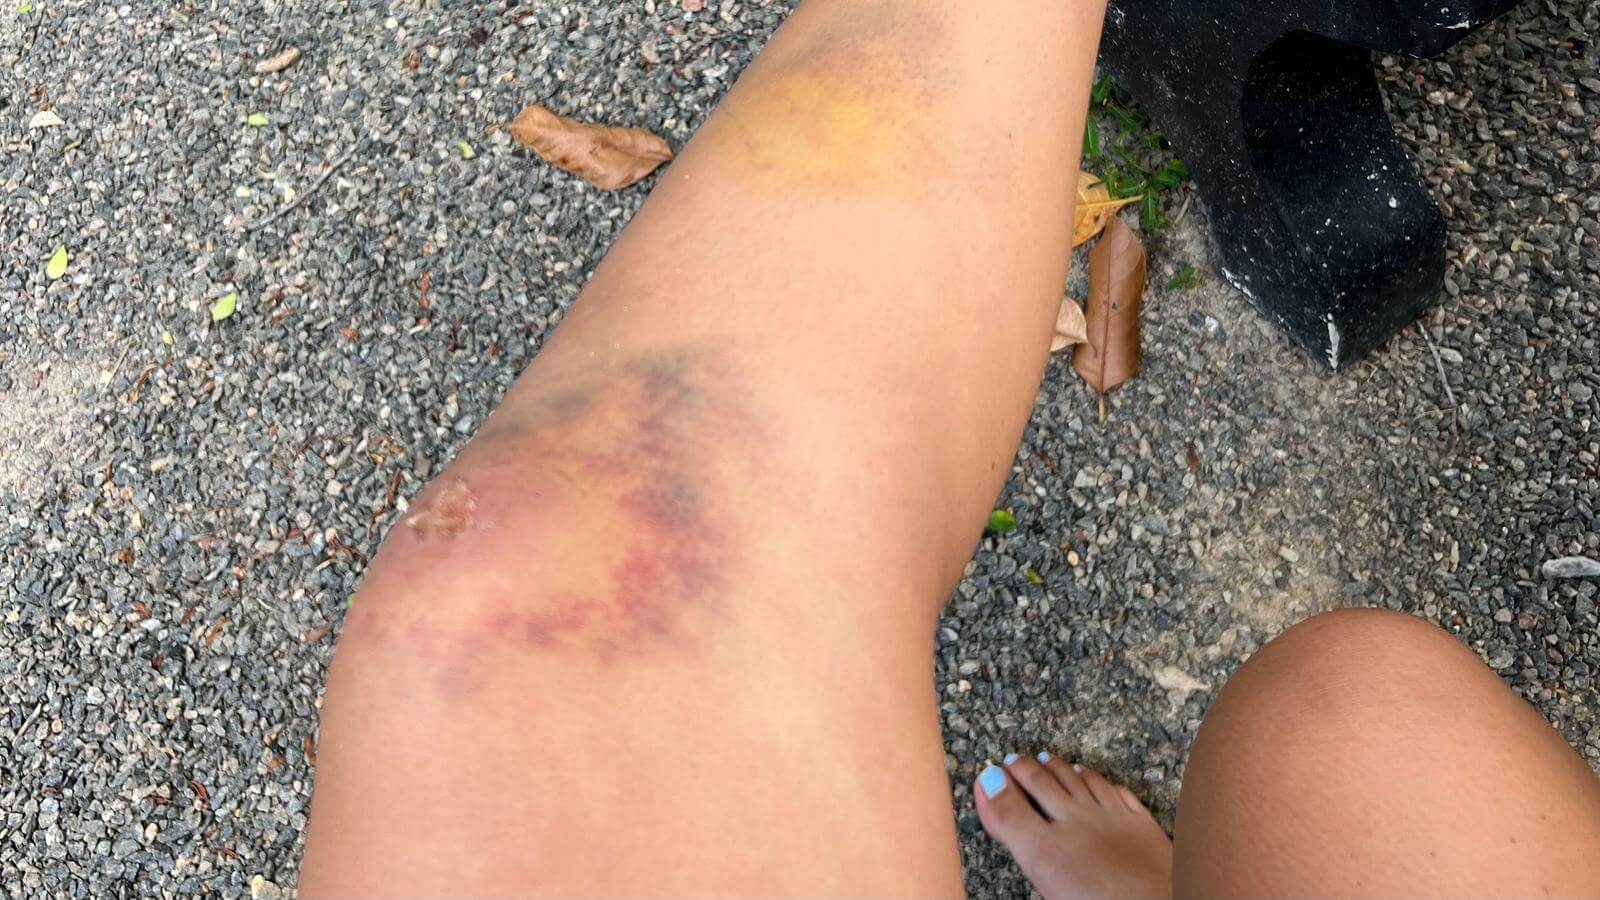 Left knee and leg covered in large red and purple bruises